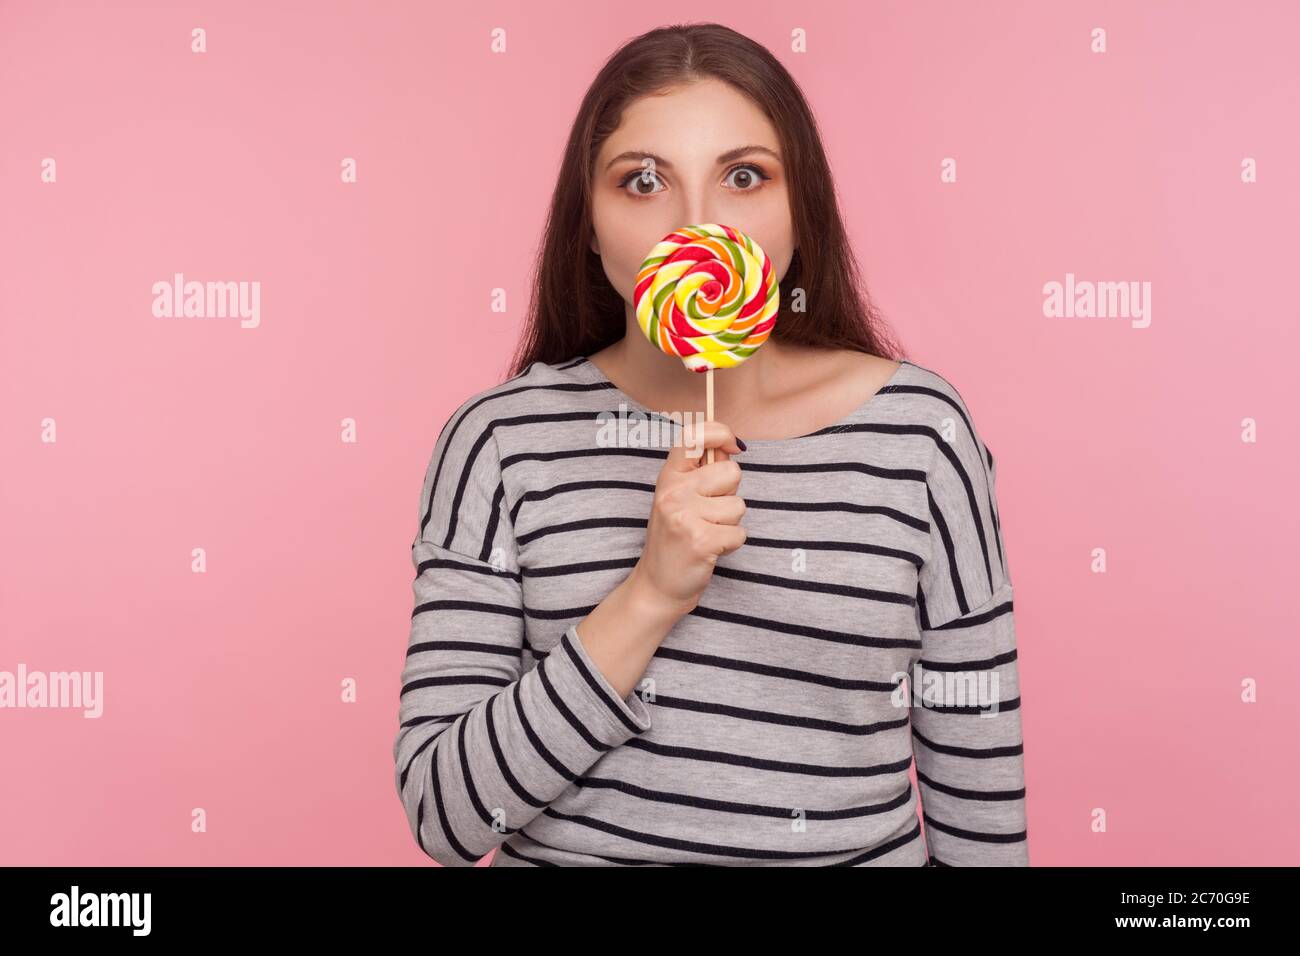 Portrait of amazed woman in striped sweatshirt licking lollipop, tasting sweet round rainbow candy with surprised expression, enjoying delicious flavo Stock Photo